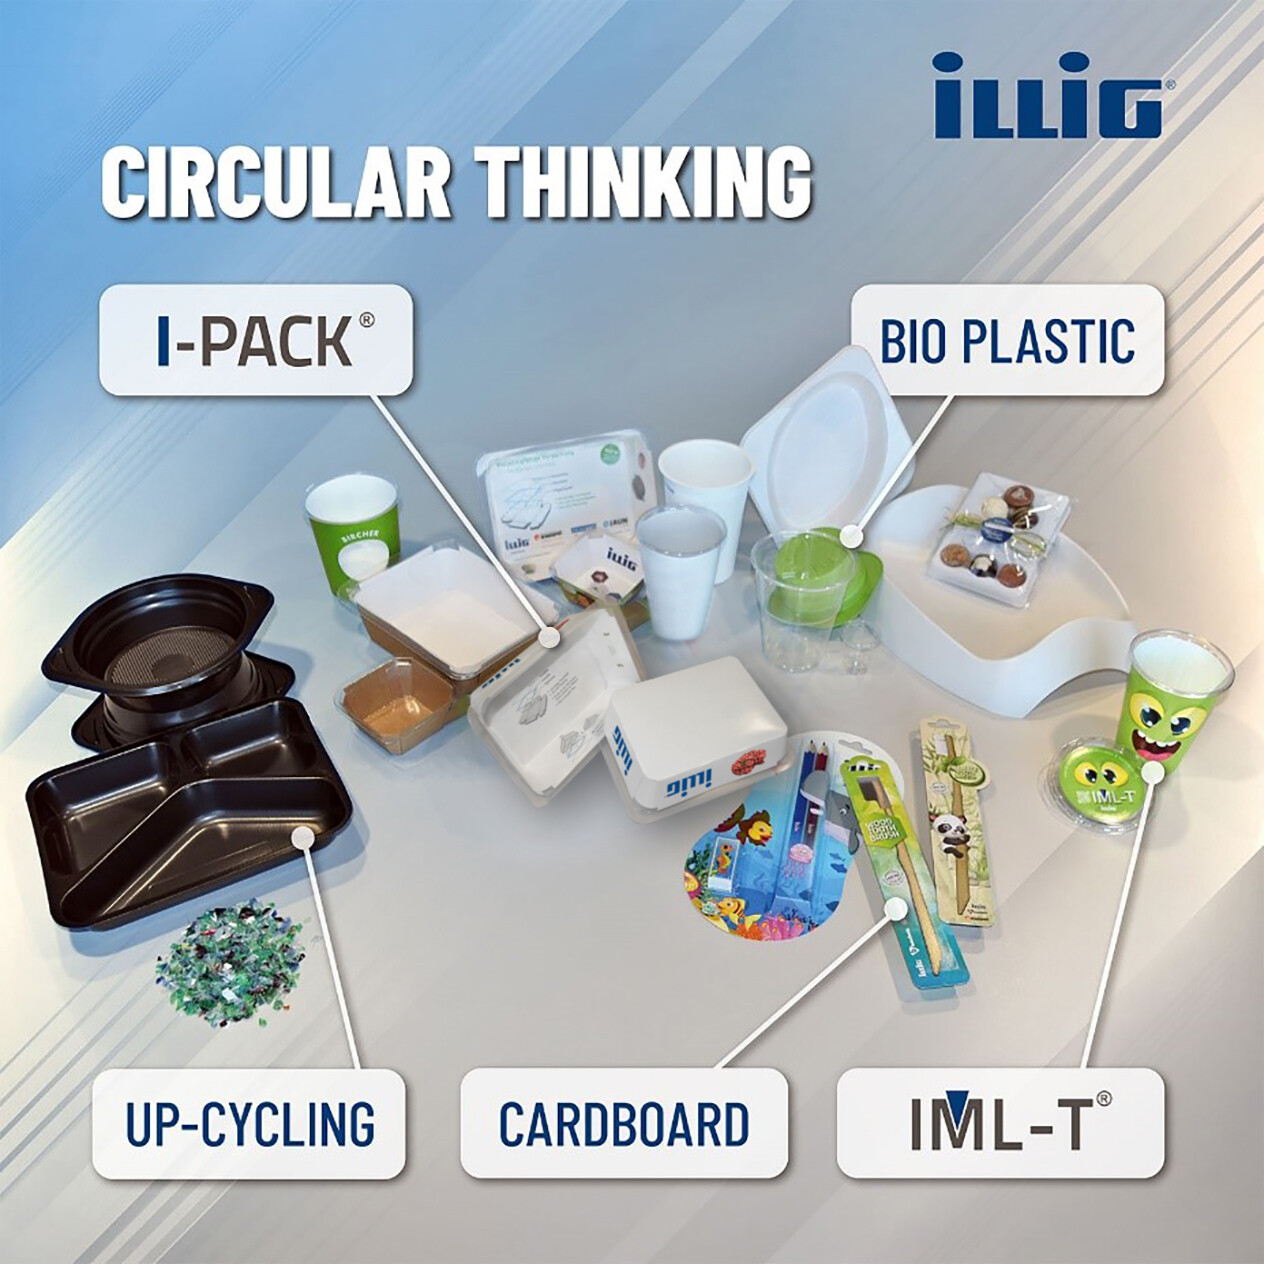 With its Pactivity® packaging development, ILLIG is developing resource-efficient and sustainable solutions also for recycling.